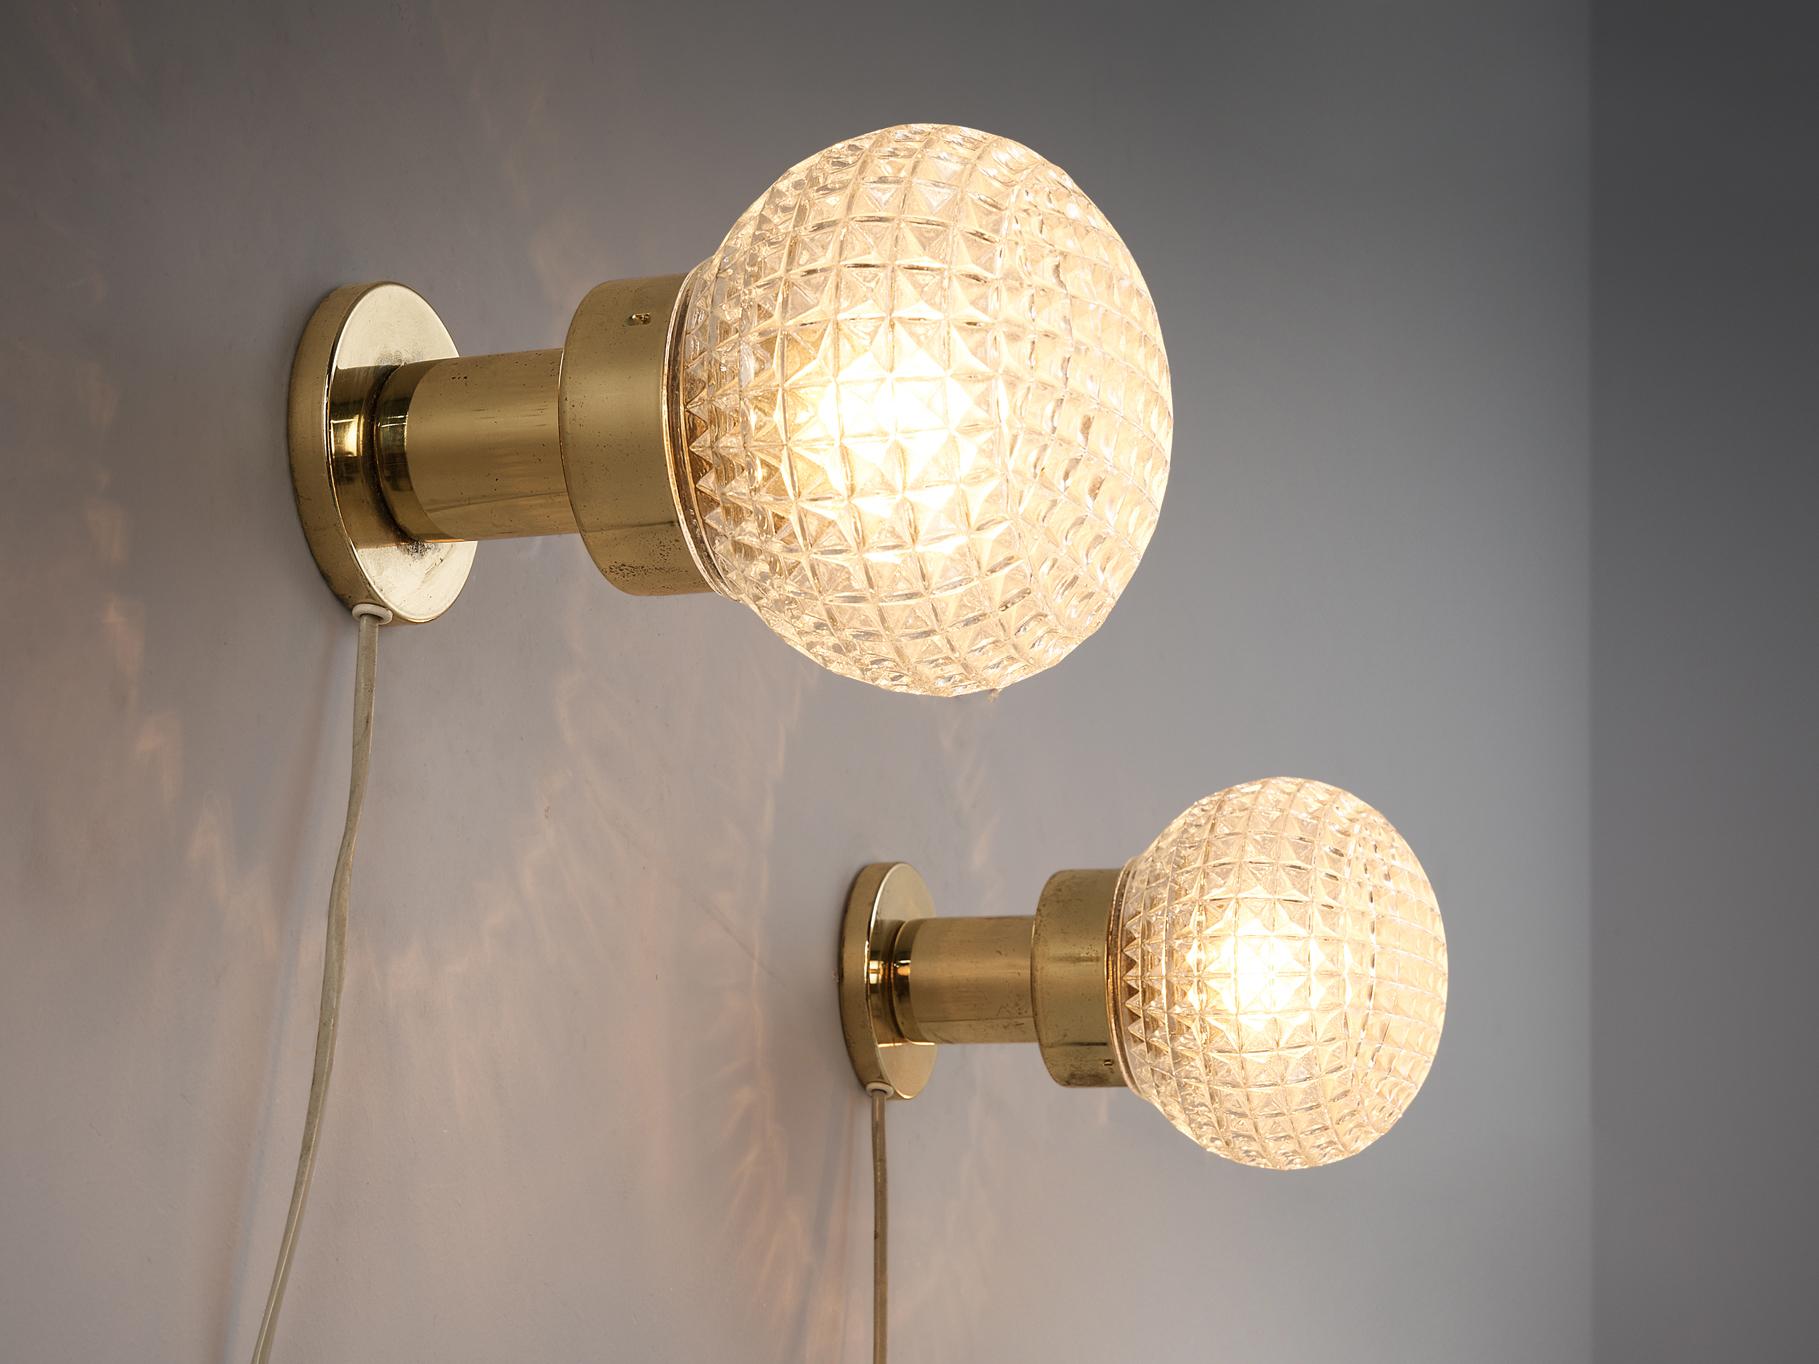 Pair of wall lights, glass, brass, metal, Czech Republic, 1960s

These eccentric scones or table lamps are based on a round construction. The structured glass orb is supported by a round shaped pedestal. The relief surface with a slightly ocher